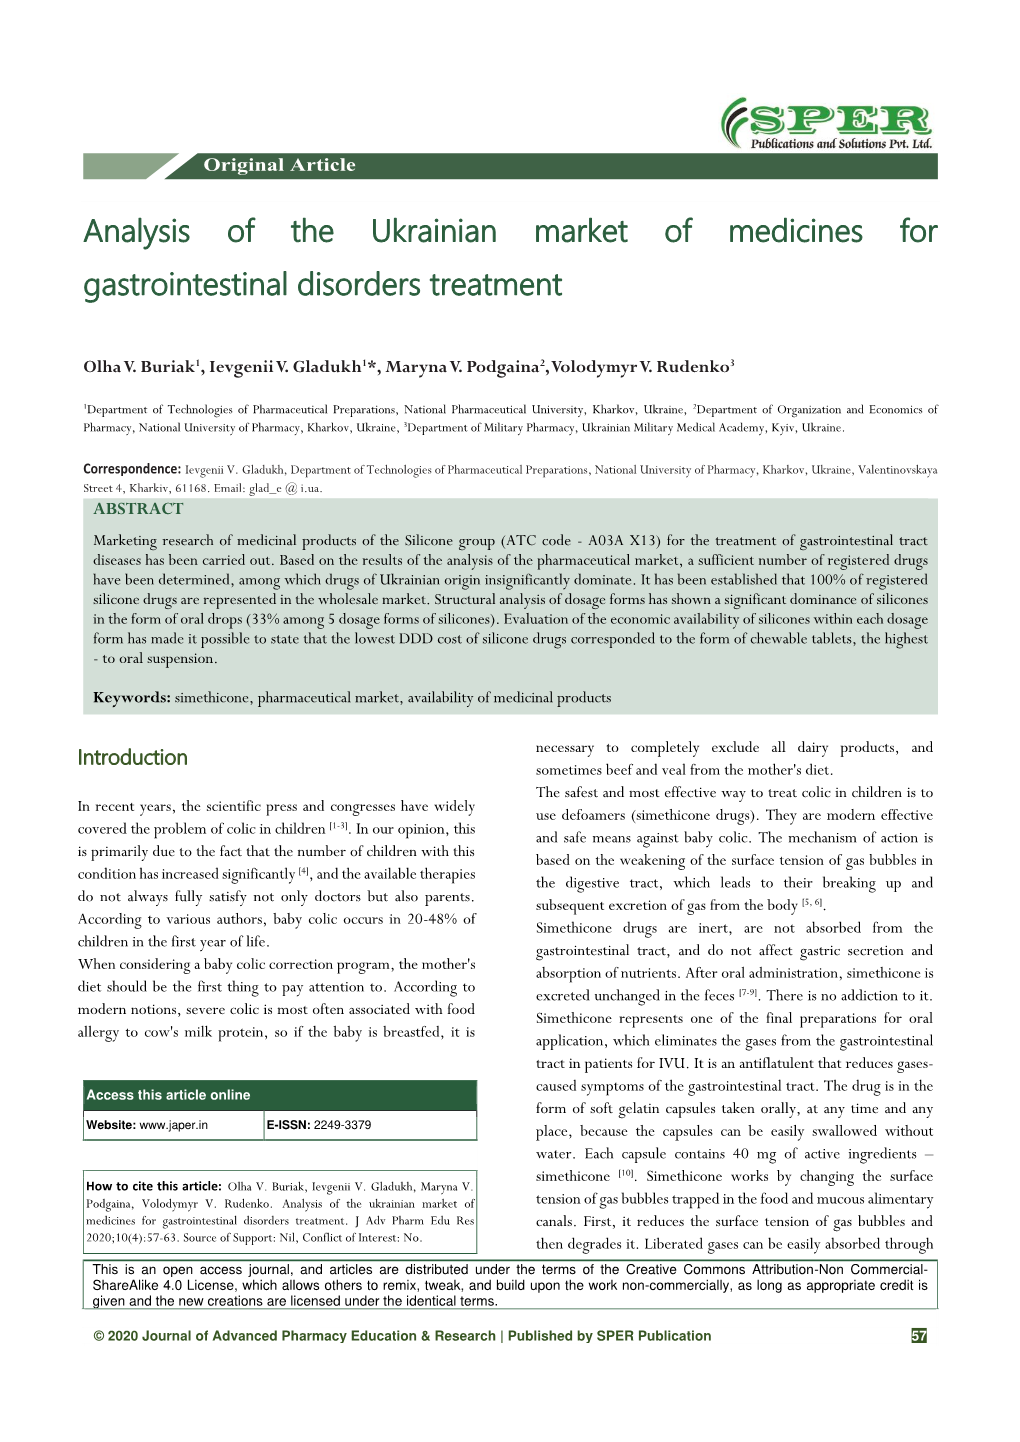 Analysis of the Ukrainian Market of Medicines for Gastrointestinal Disorders Treatment